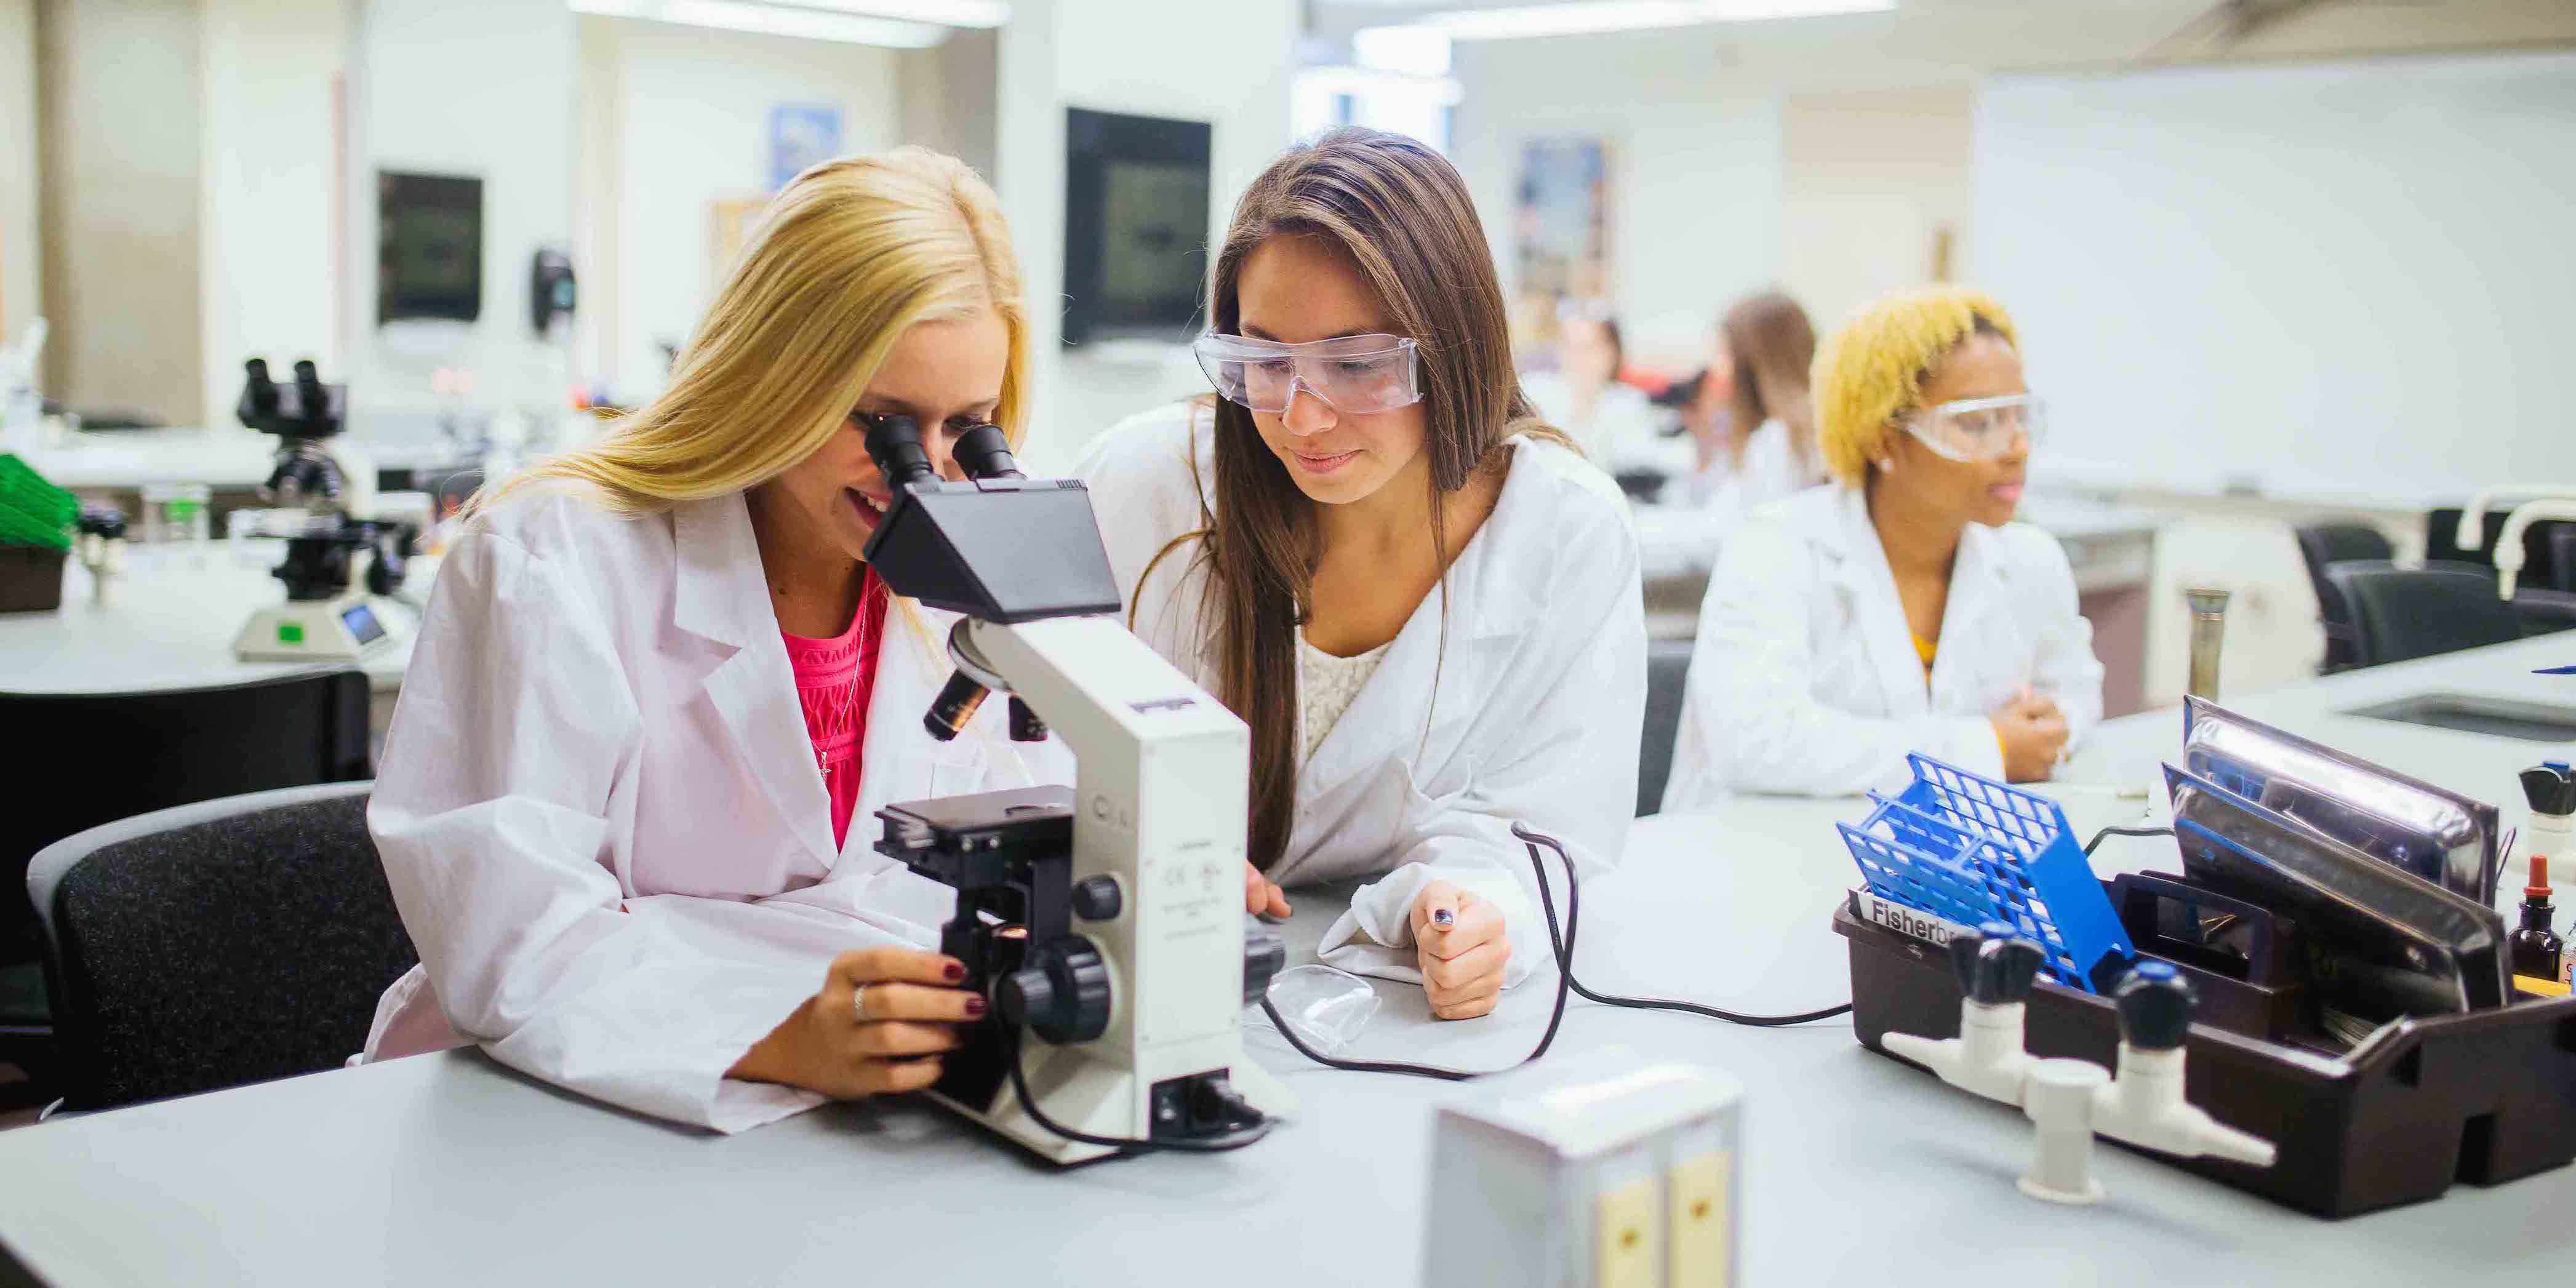 three female students in lab wearing lab coats and safety glasses while using microscope